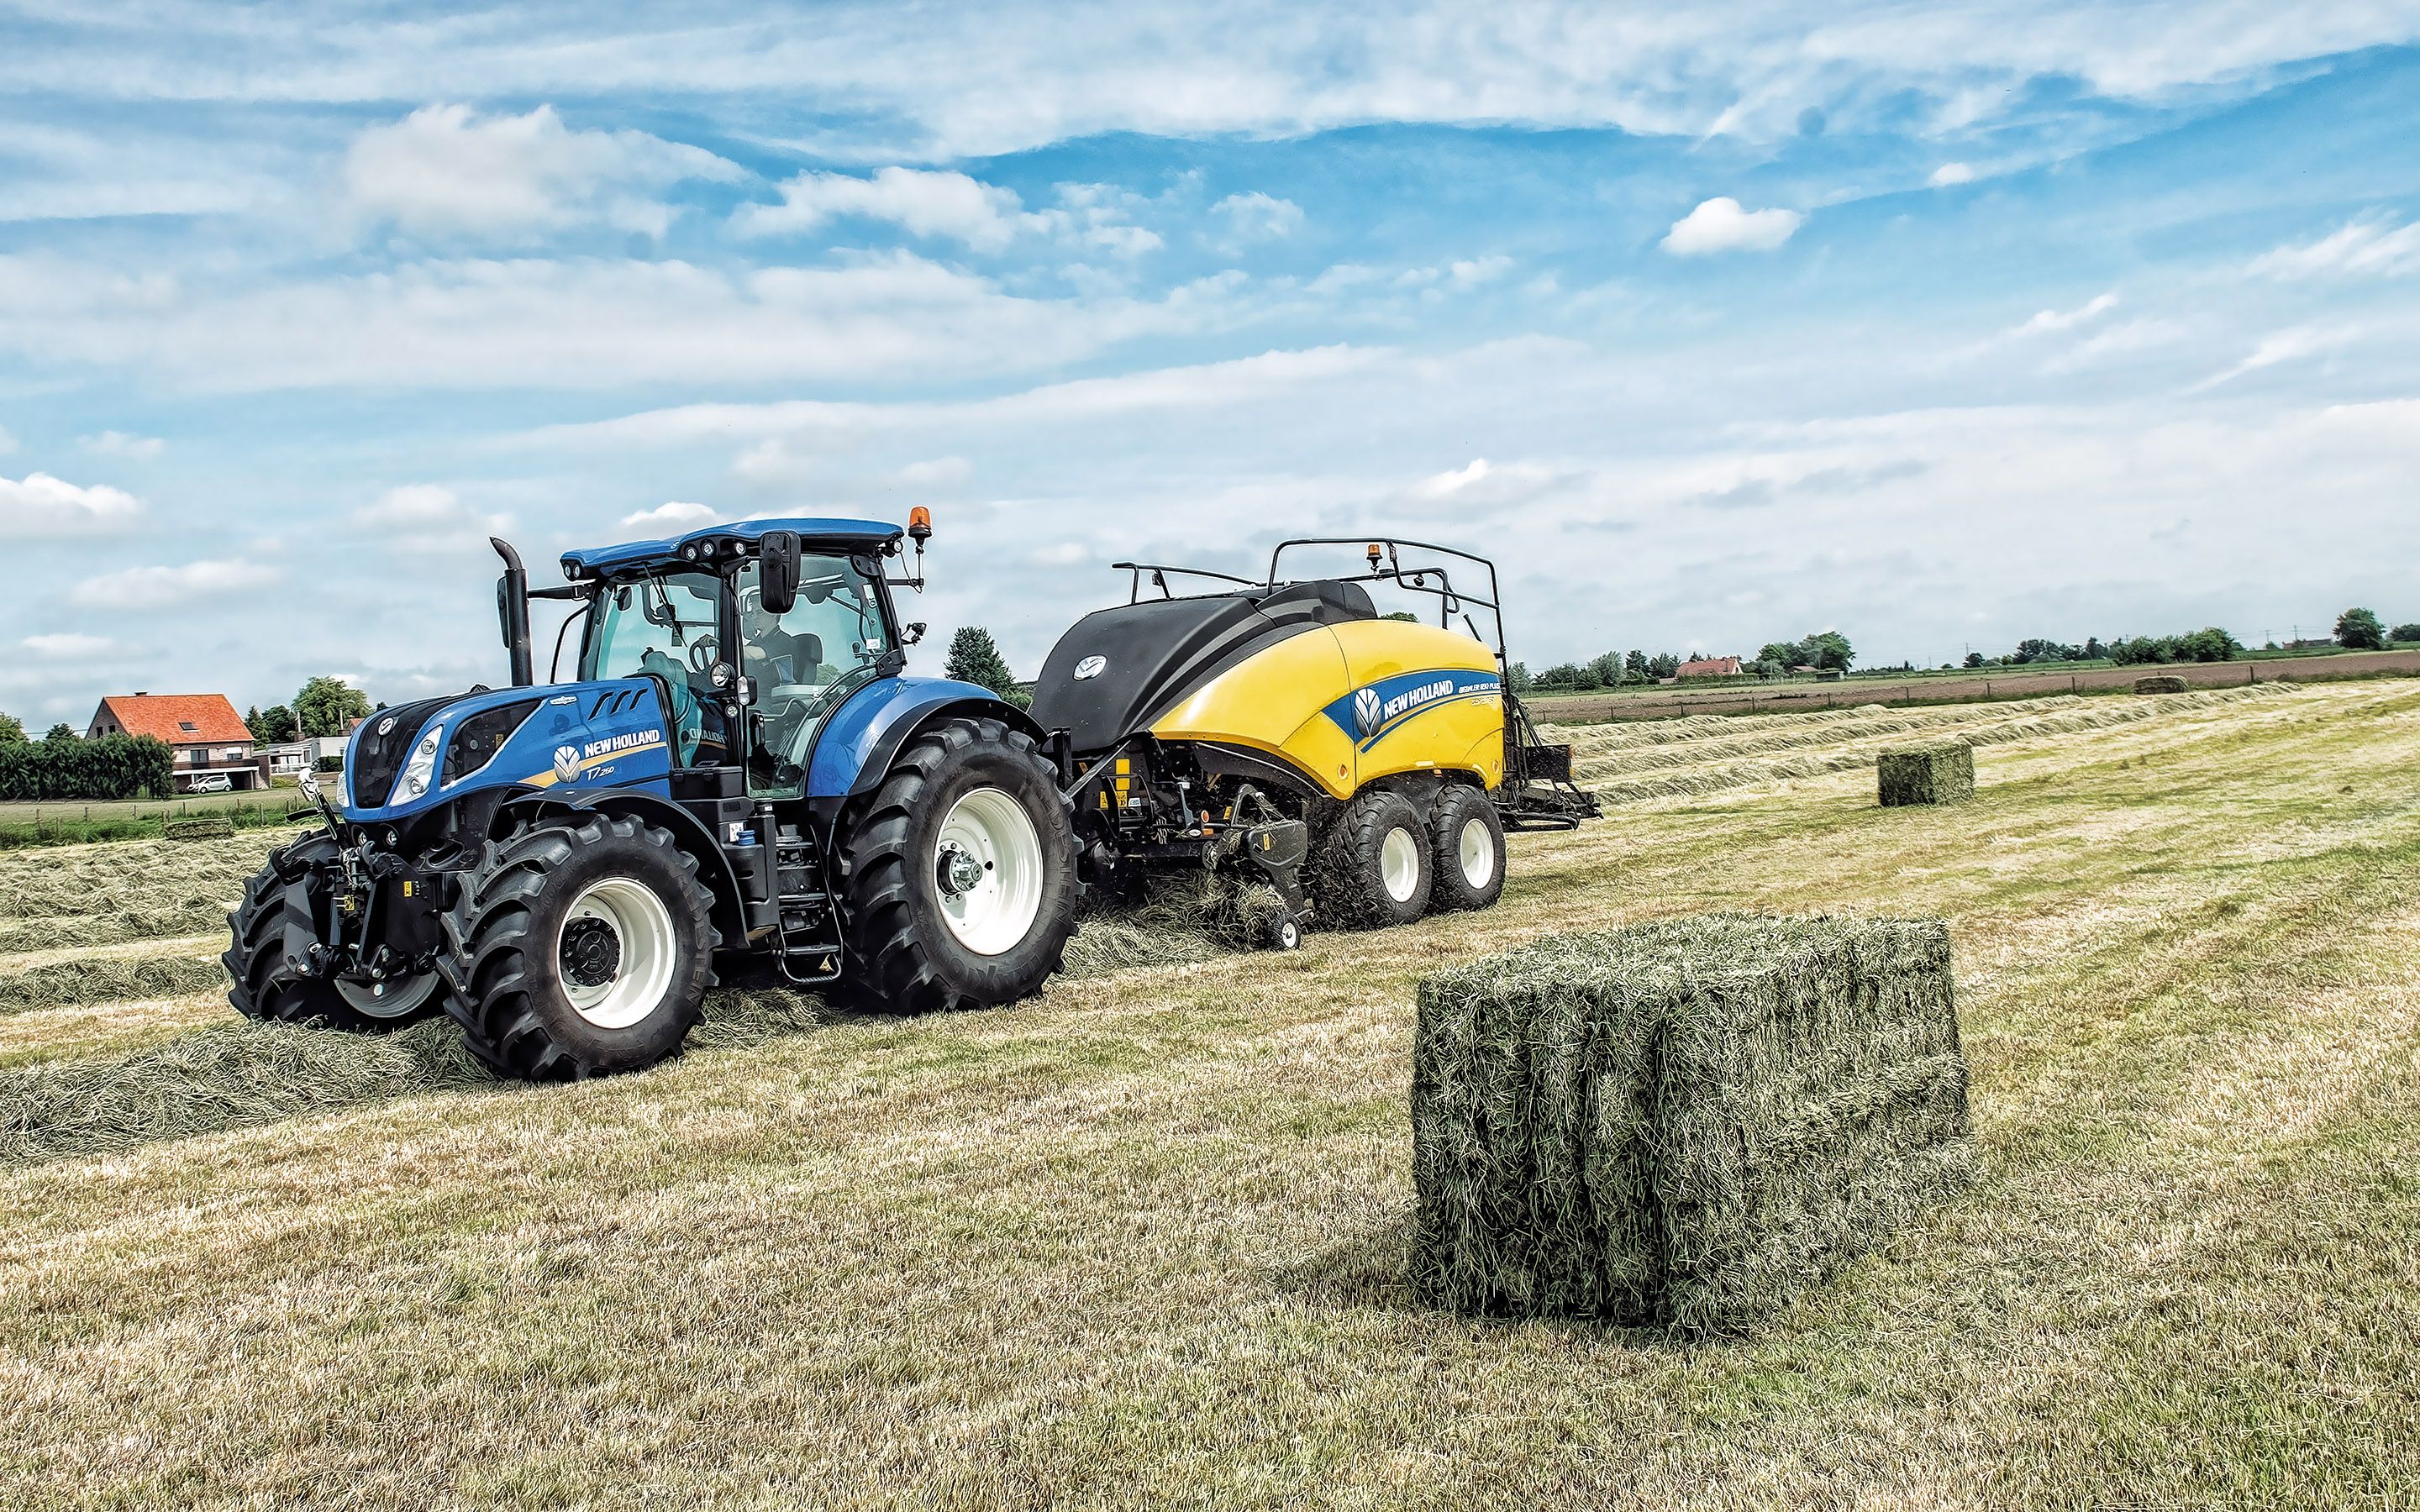 Download wallpaper New Holland T tractor, New Holland BigBaler 890 Plus CropCutter, harvesting concepts, field, agricultural machinery, New Holland for desktop with resolution 2880x1800. High Quality HD picture wallpaper